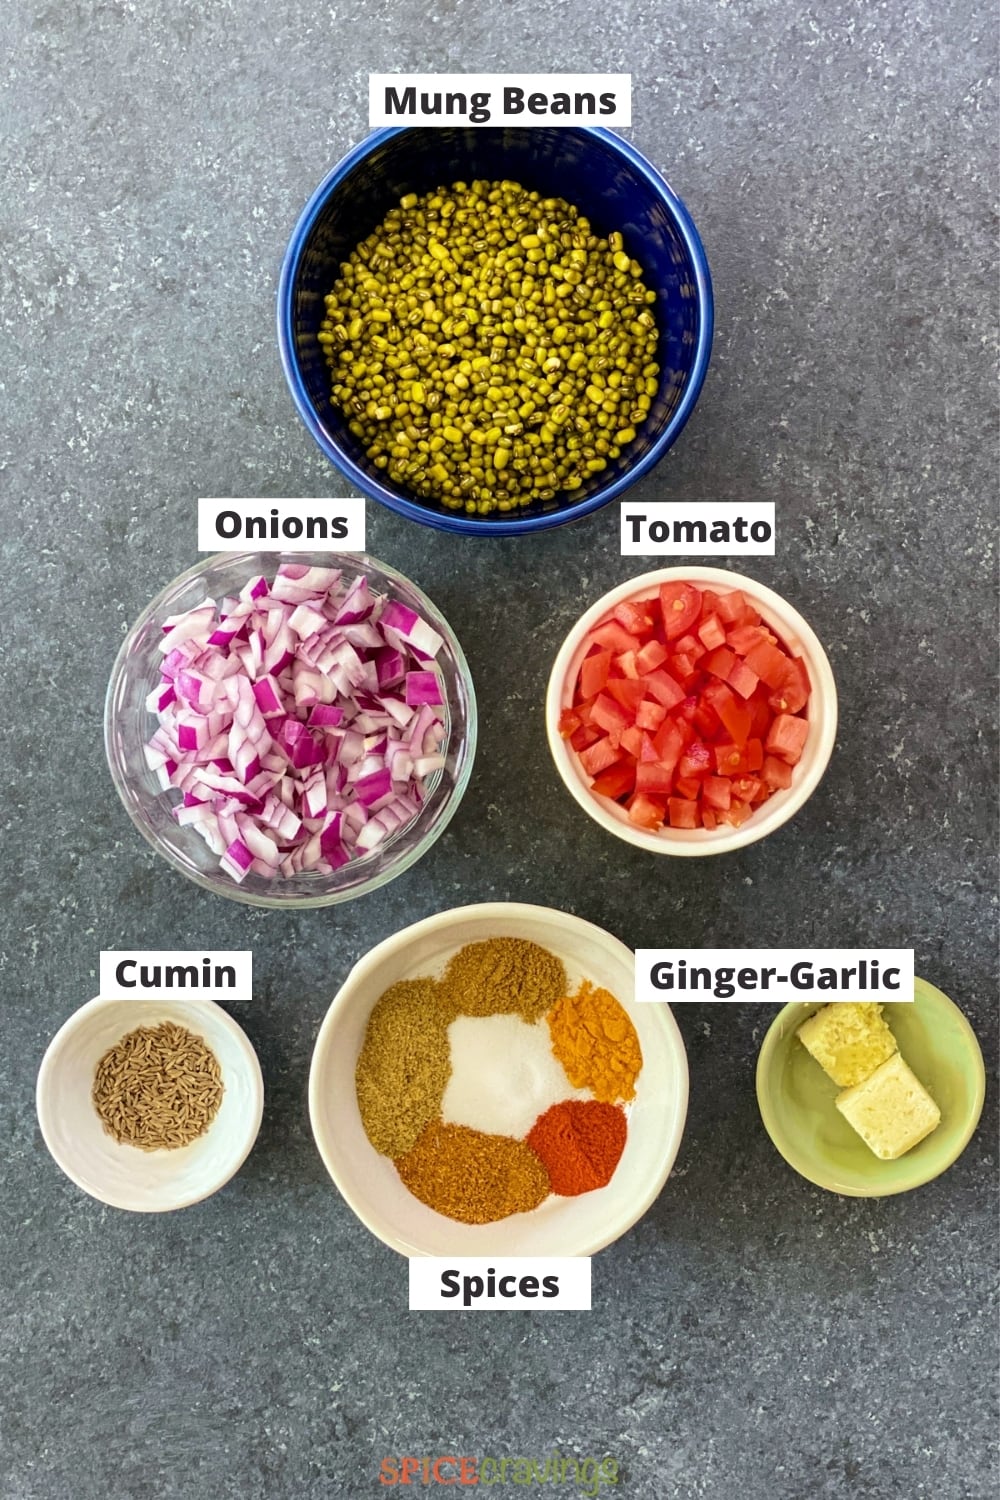 whole mung beans, red onion, diced tomato, cumin seeds, spices, garlic ginger paste